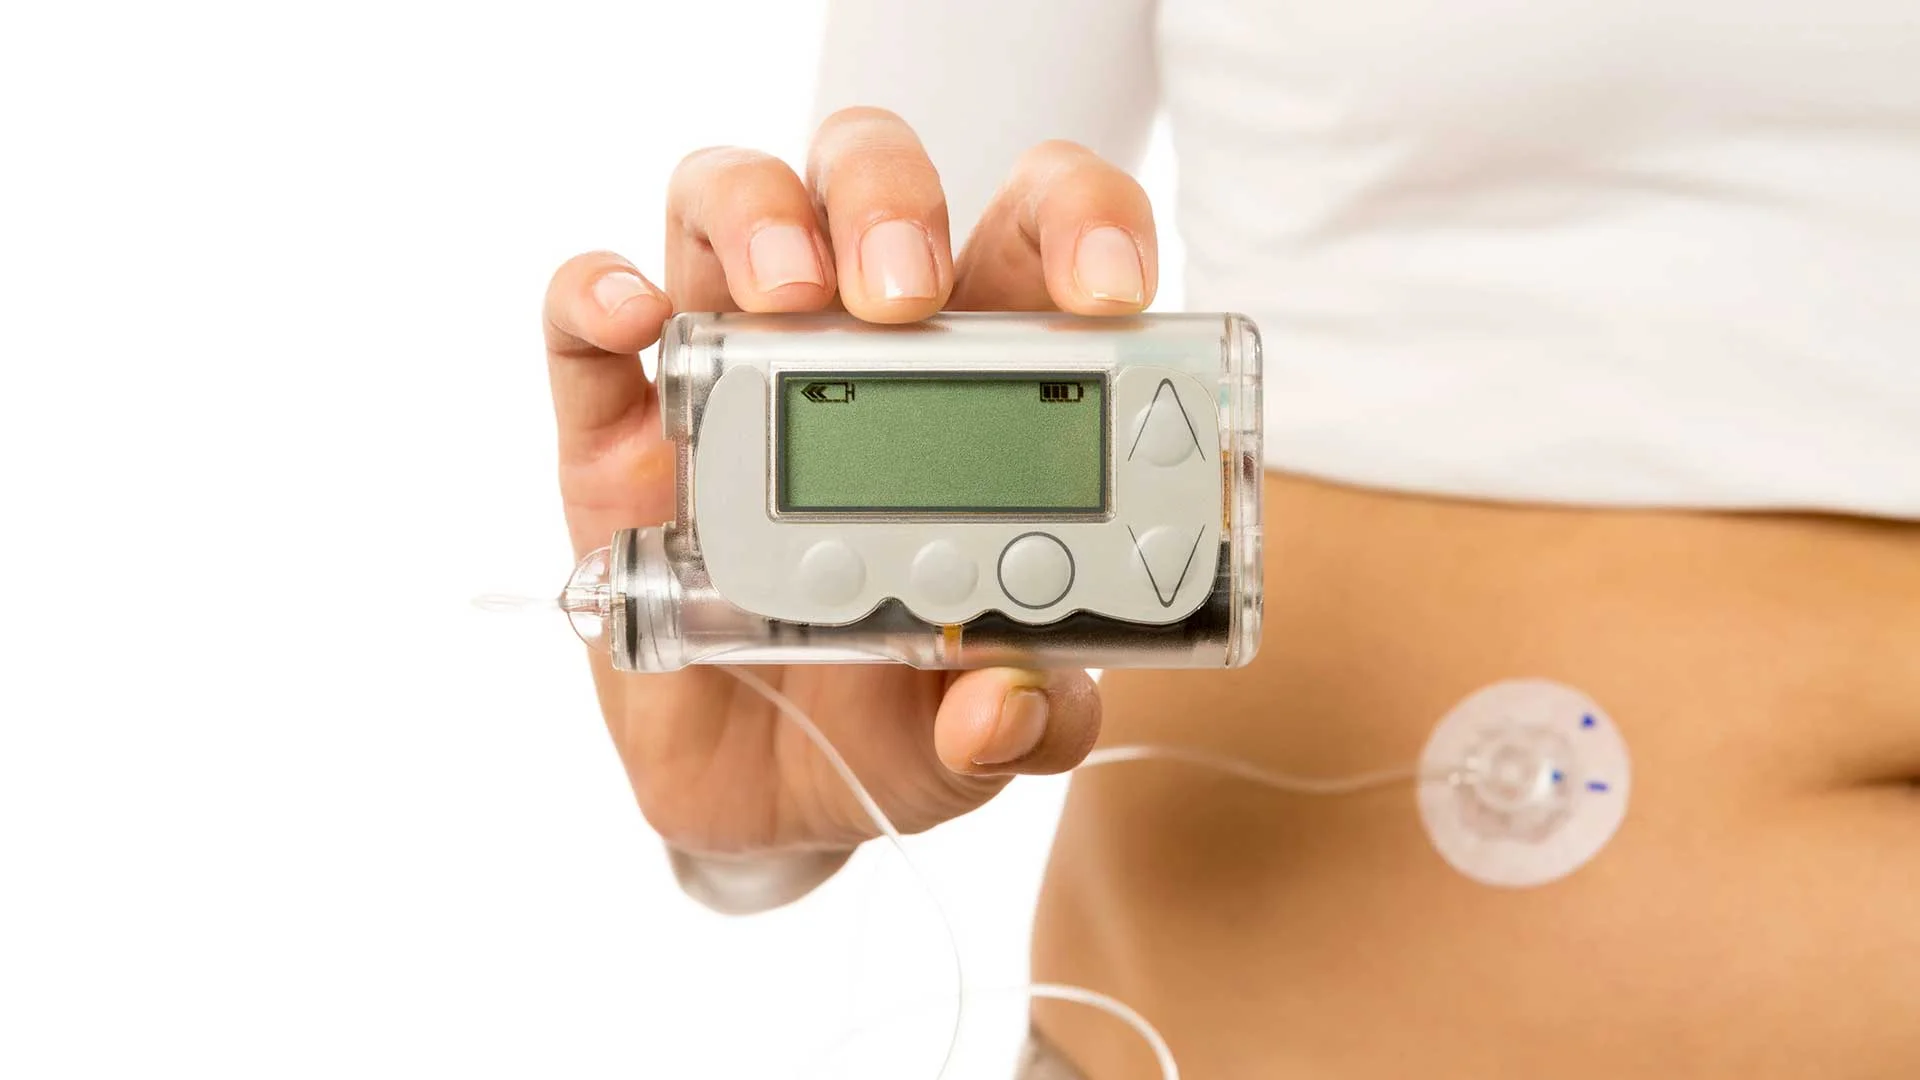 FDA approves 1st automated, tubeless insulin pump for people with Type 1  diabetes - Good Morning America